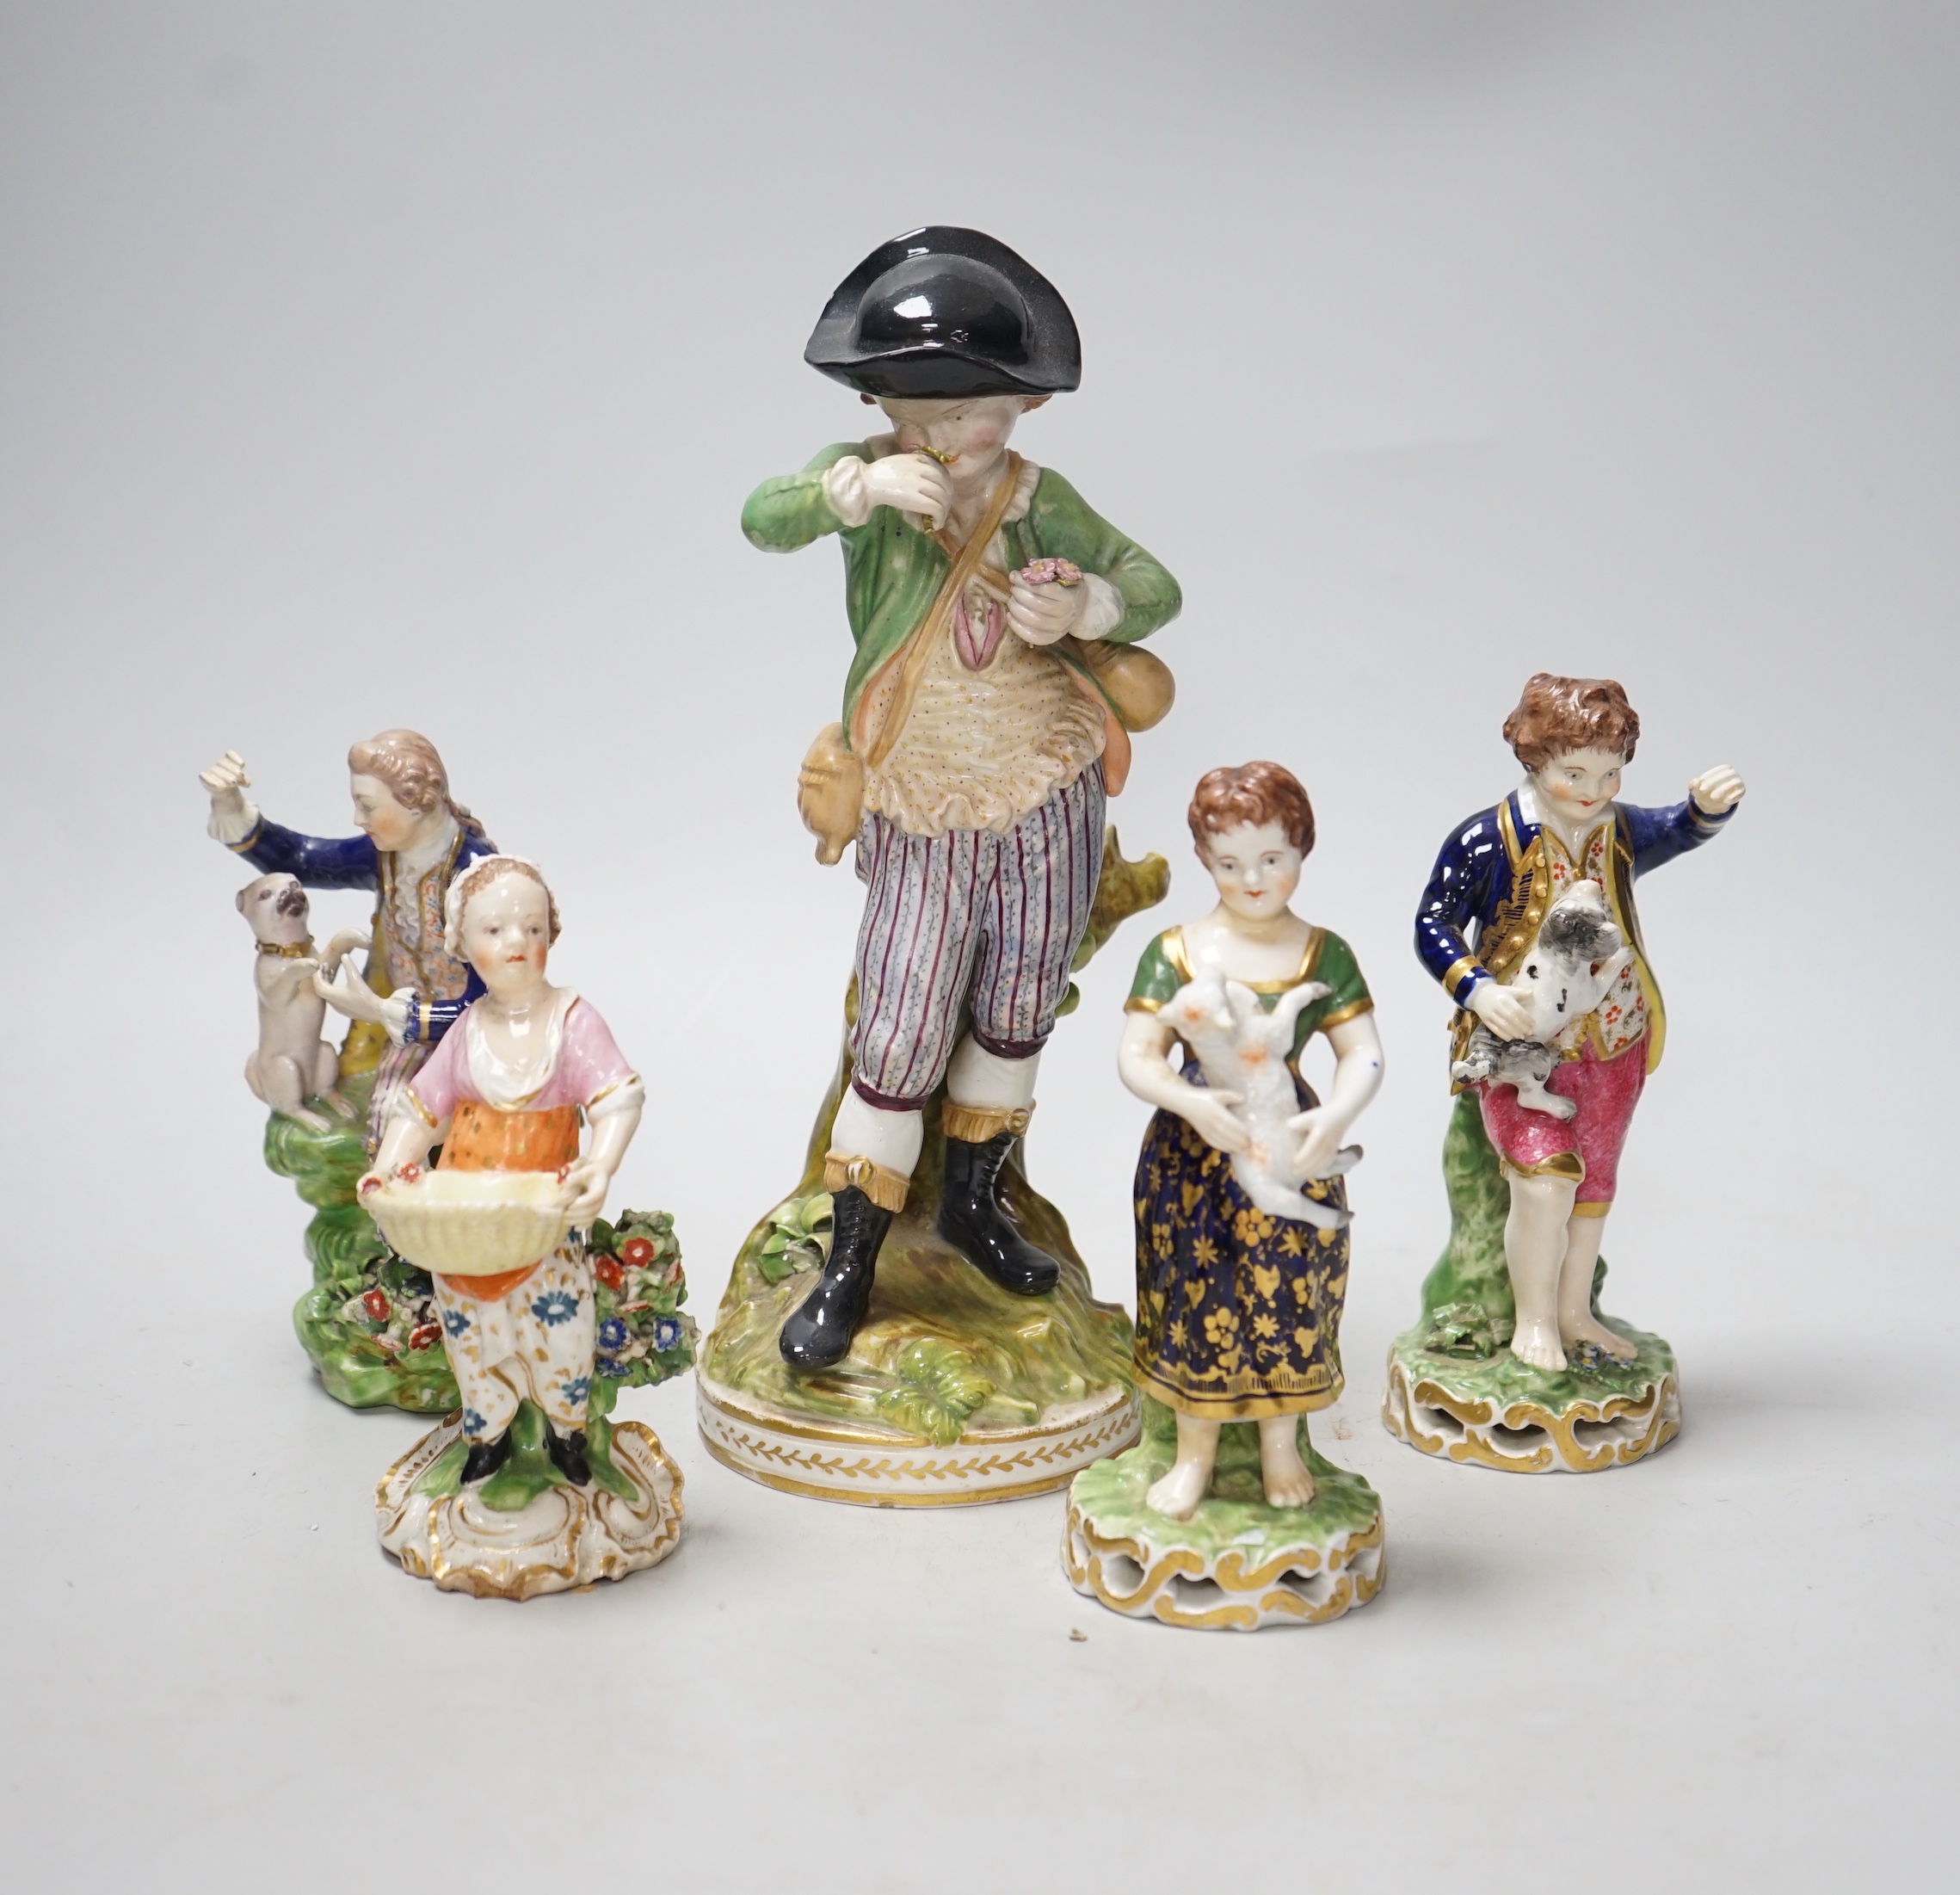 Four early 19th century Derby figures and an English porcelain figure in imitation of Derby, tallest